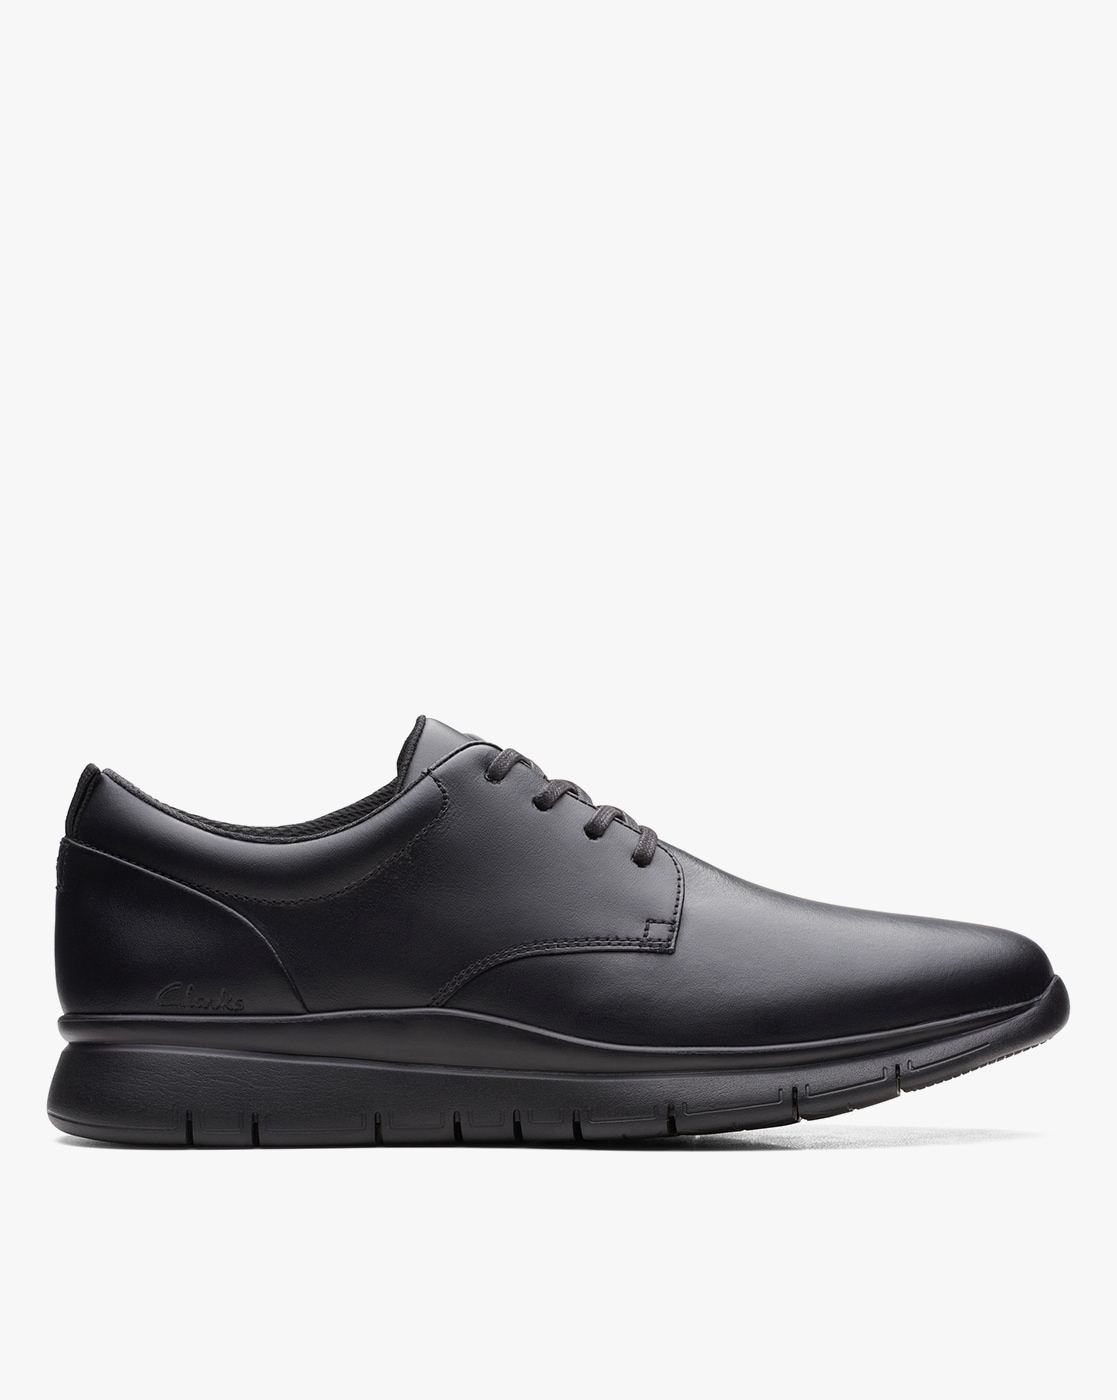 Buy Black Shoes for Men by CLARKS Online | Ajio.com